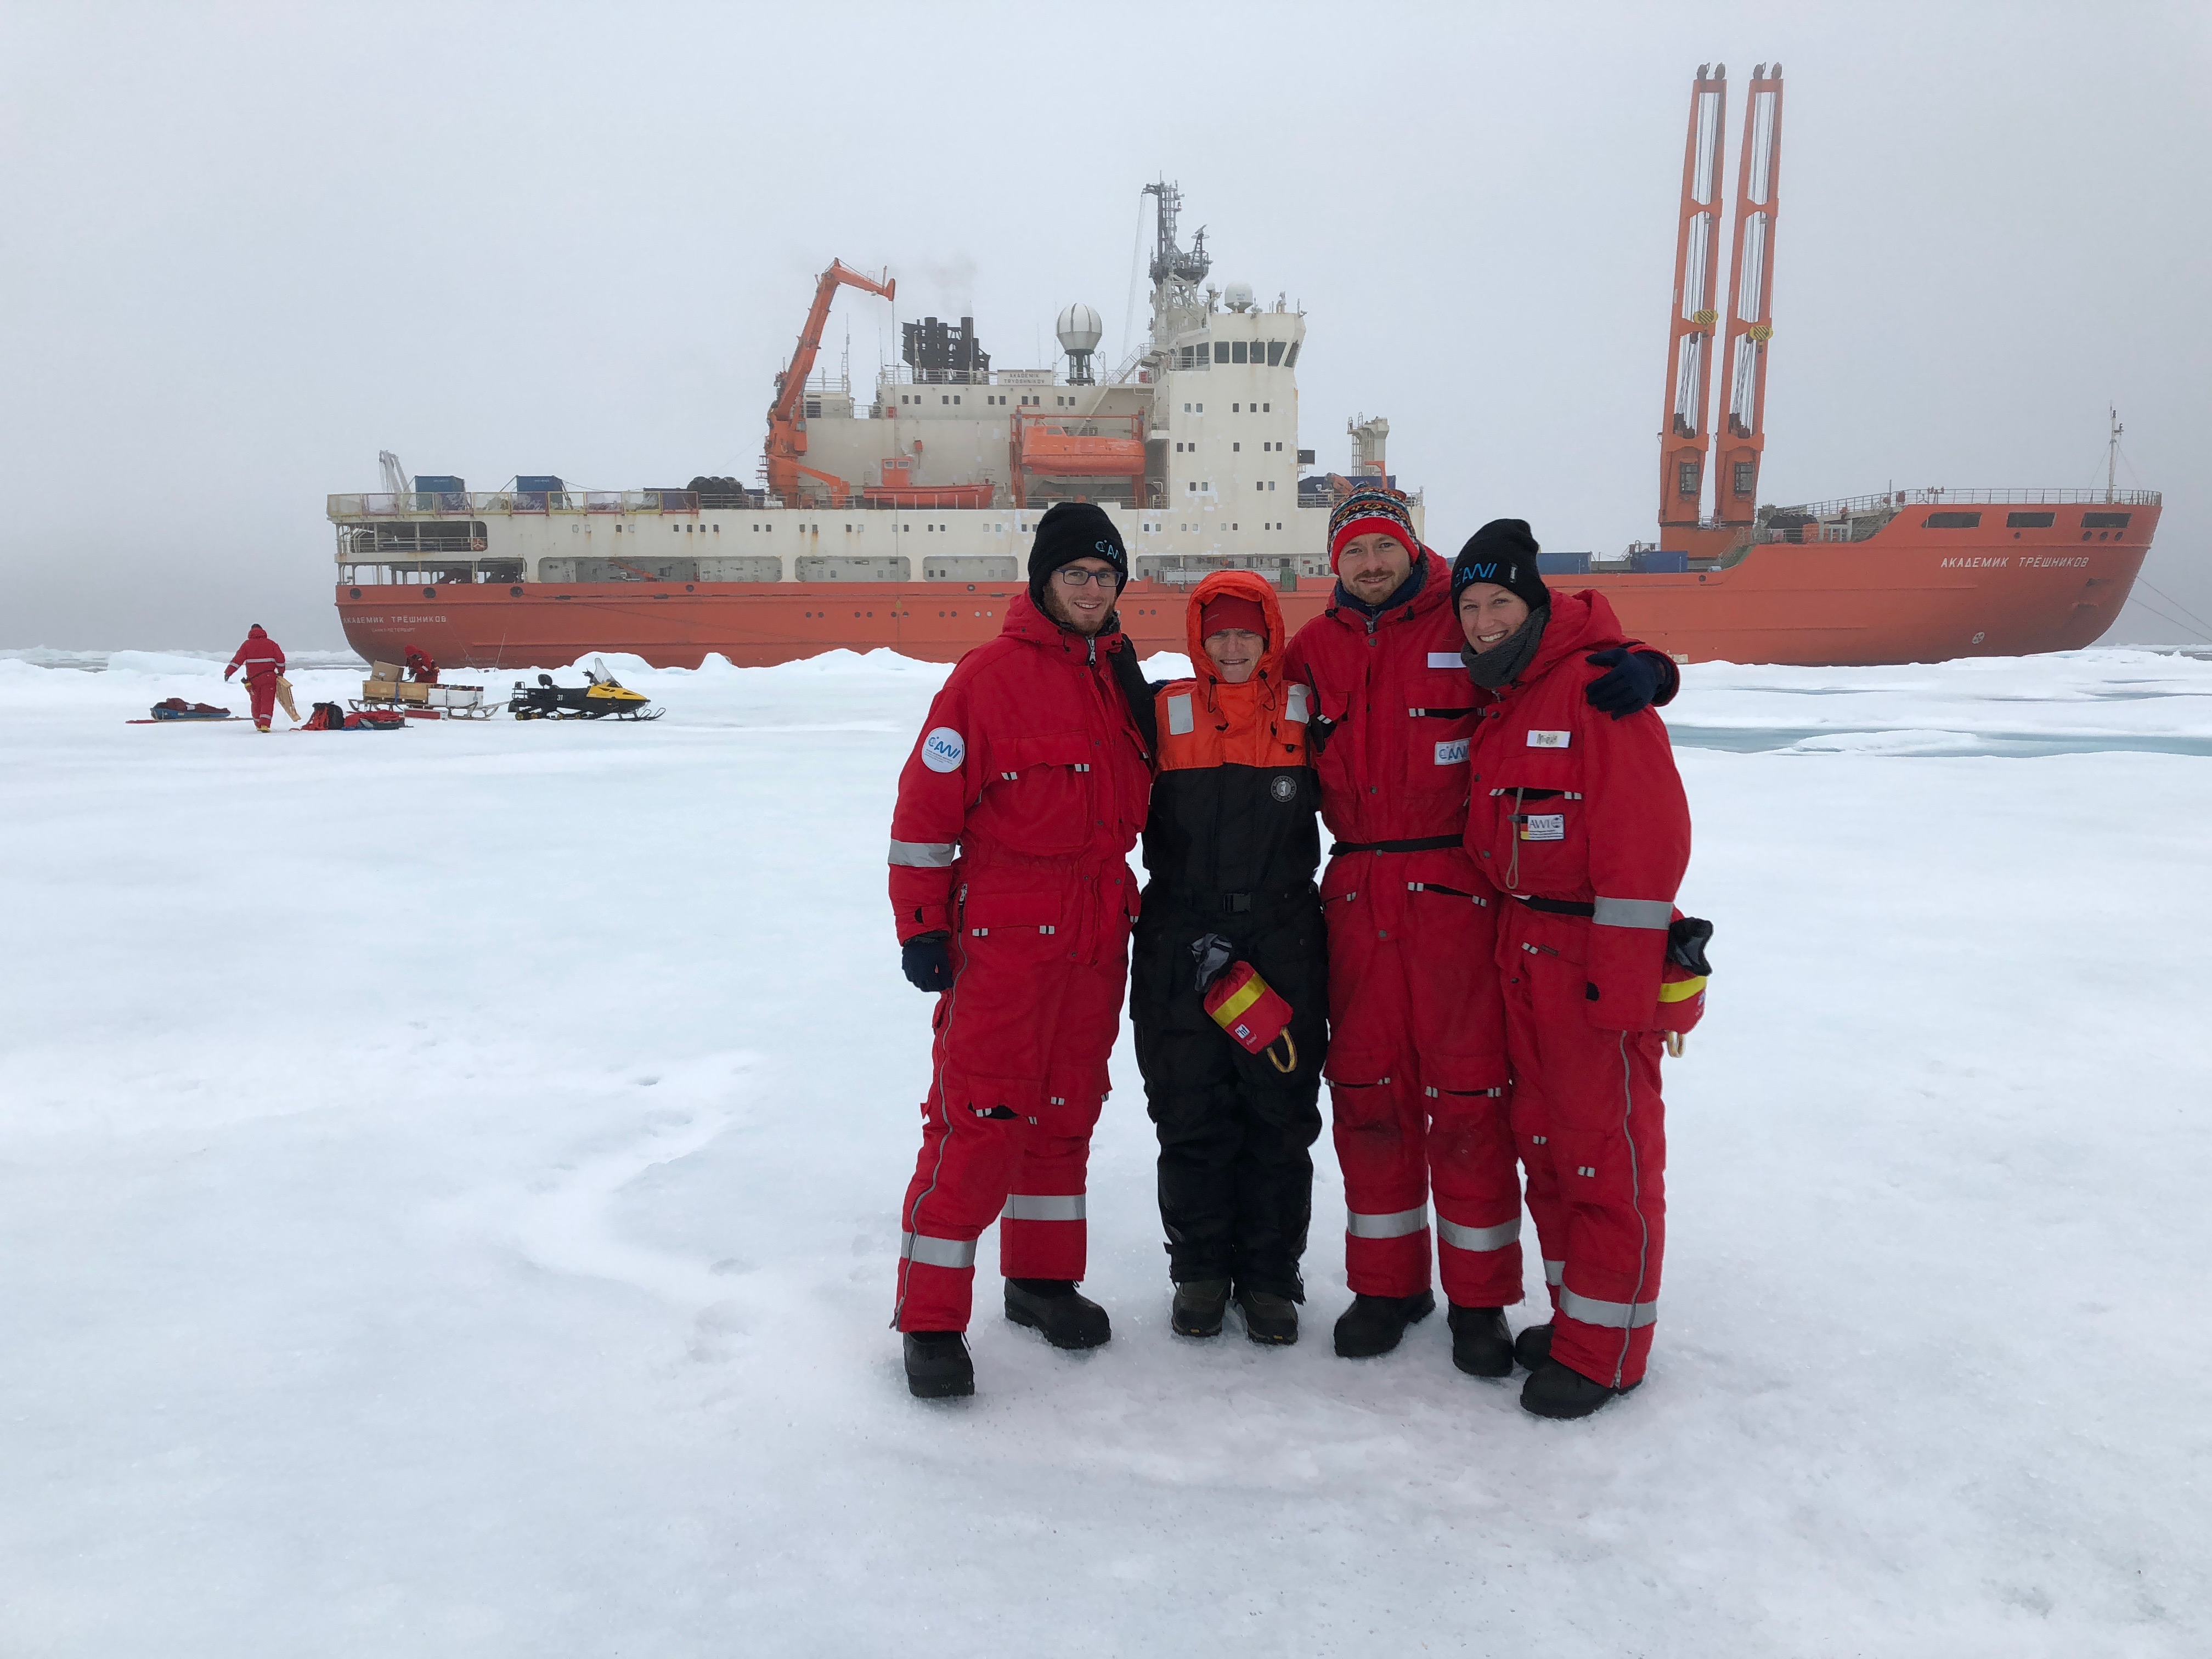 NABOS participants pose on the sea ice in front of the research vessel Akademik Tryoshnikov during the 2018 expedition to the eastern Arctic Ocean. Photo by Vladimir Bogdanov.